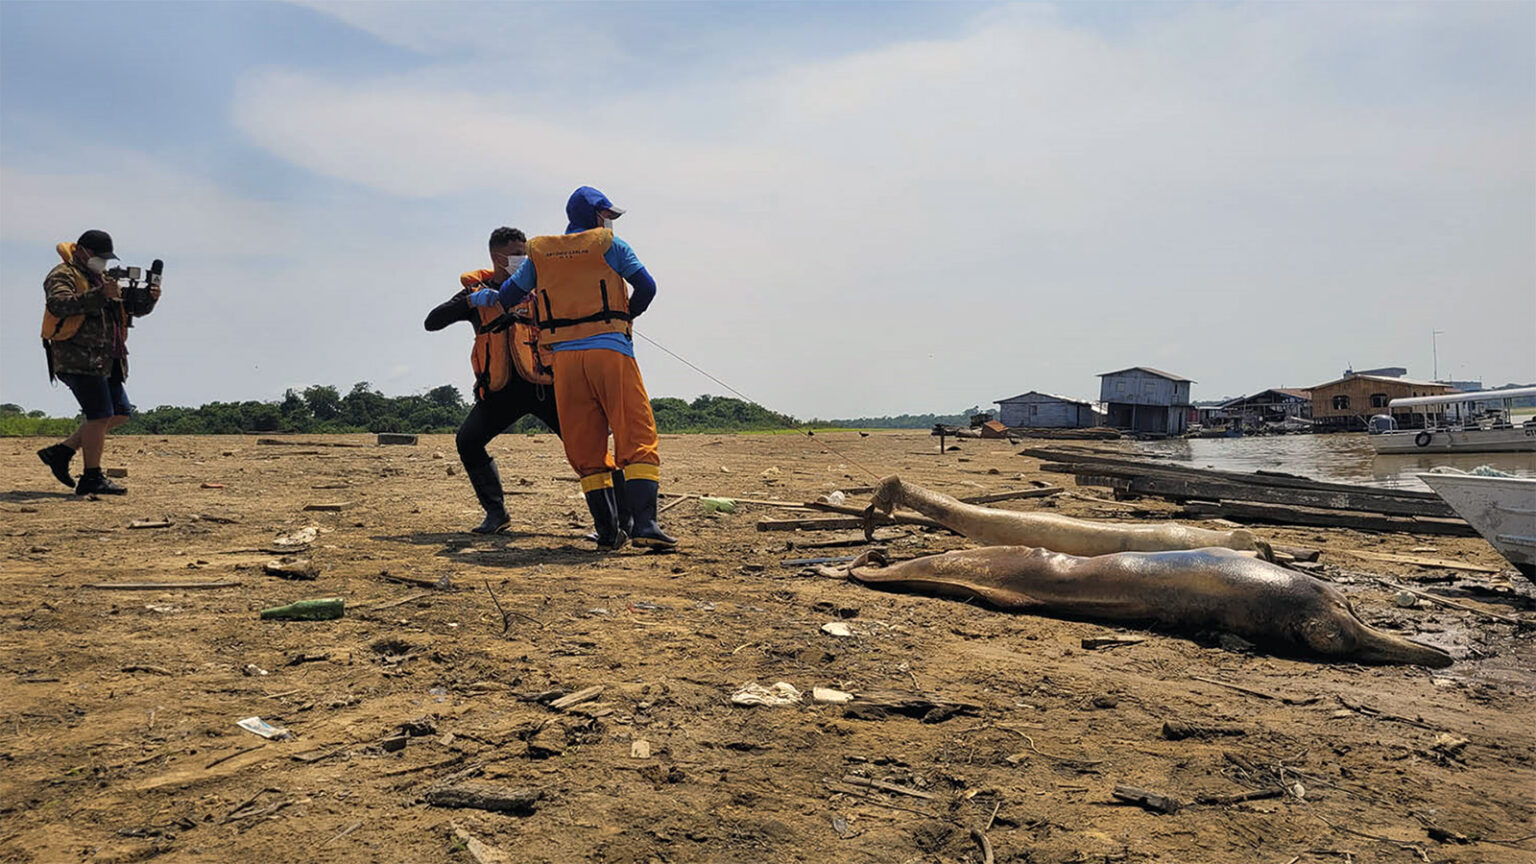 The collapse of the Amazon river dolphins